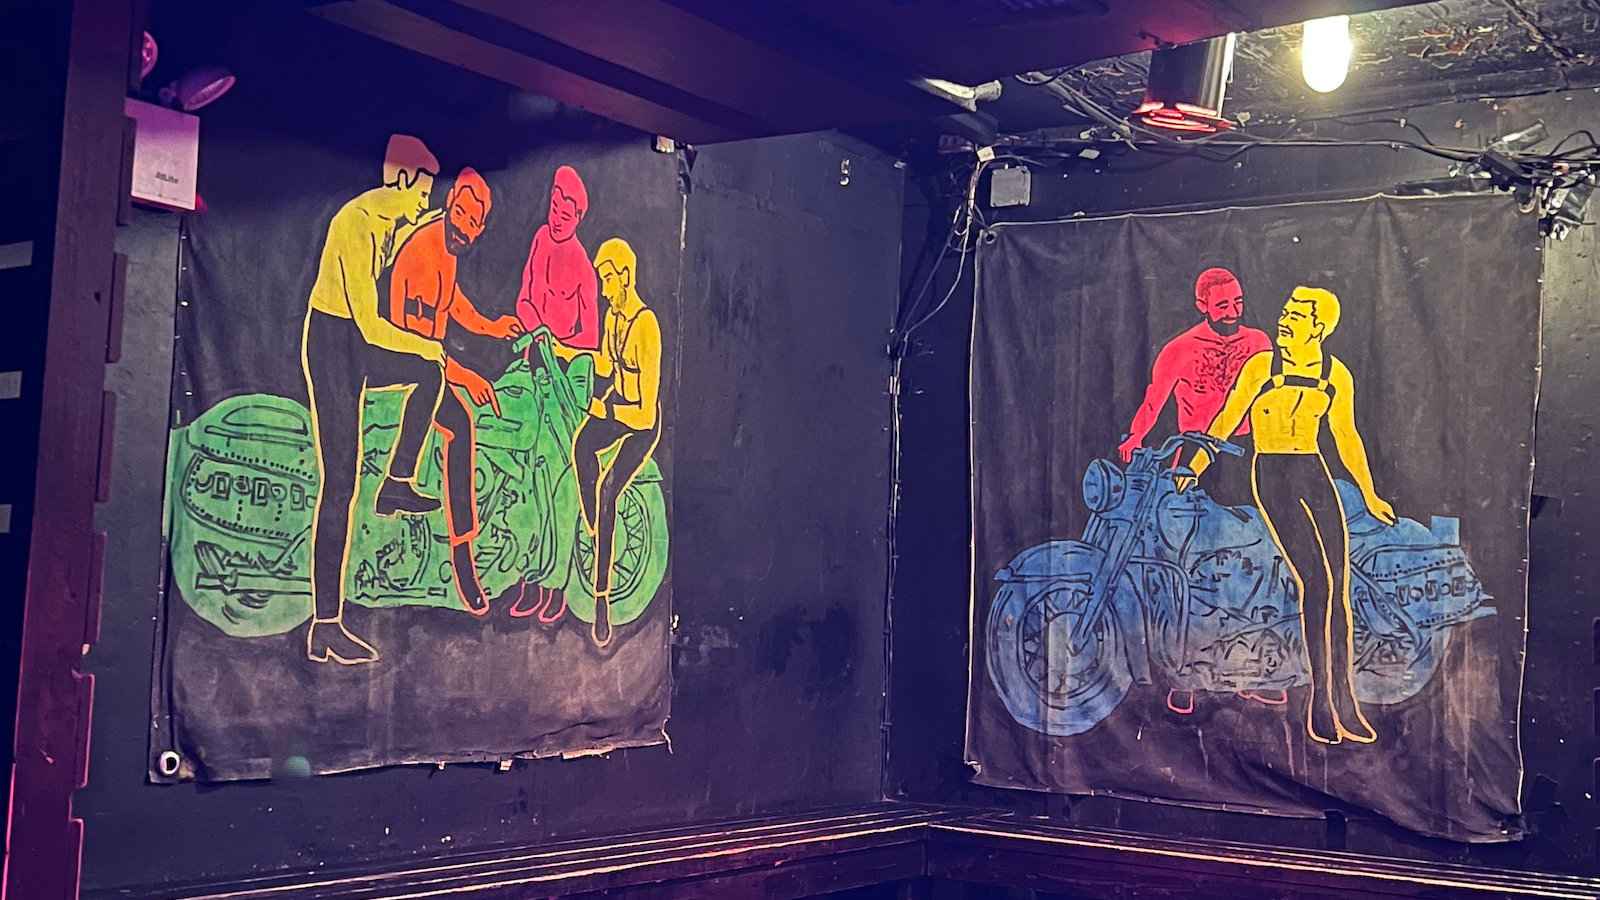 Colorful wall art showing gay men on motorbikes at the Eagle gay bar in New York City.